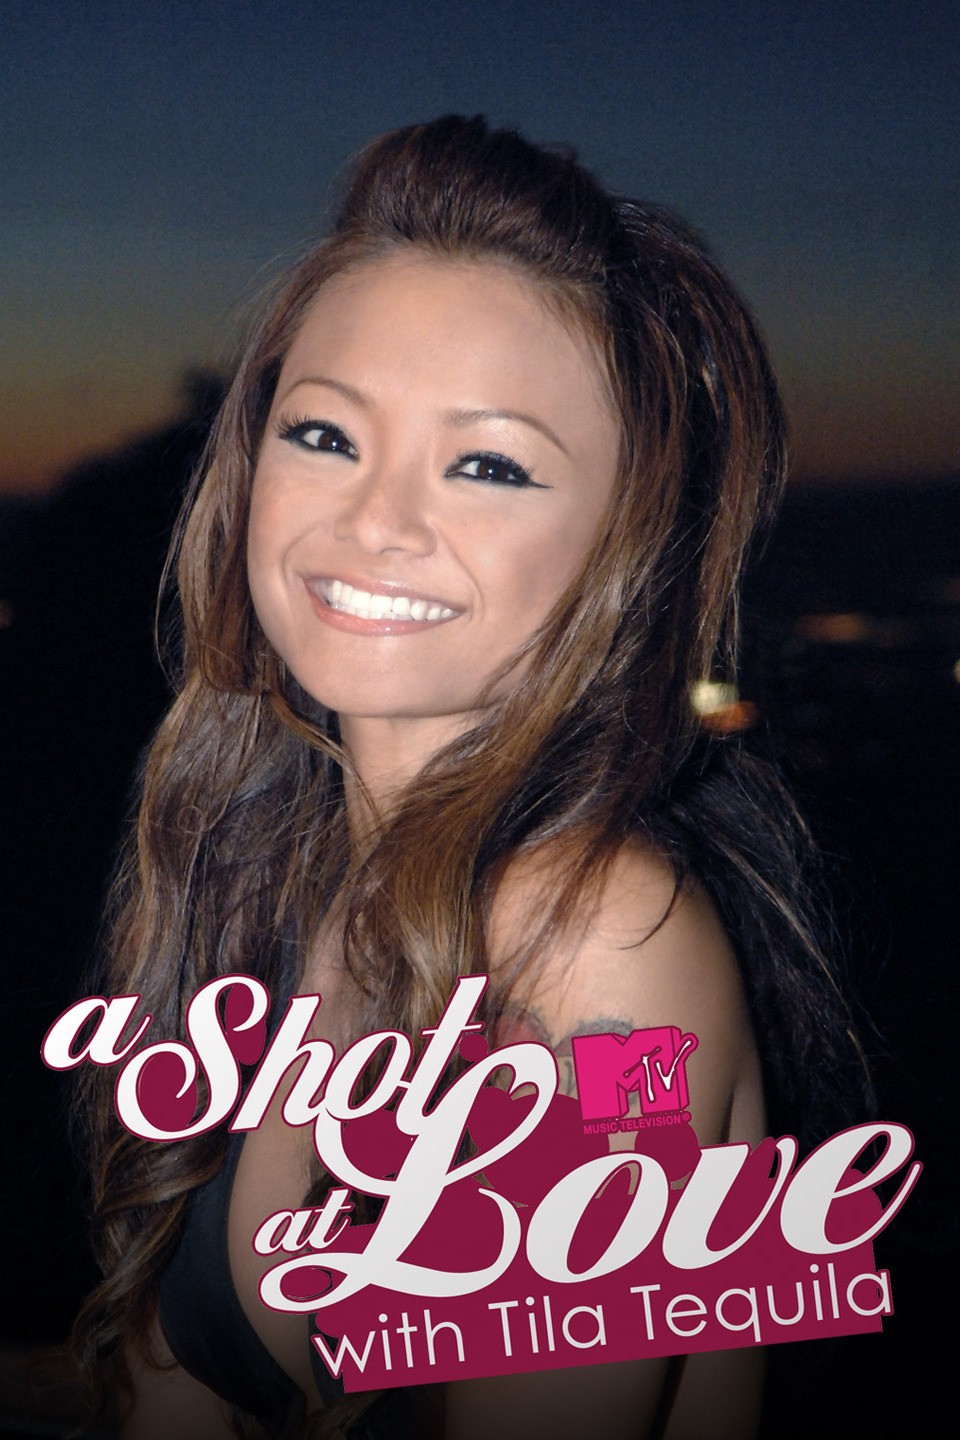 anthony koert recommends tila tequila full movie pic